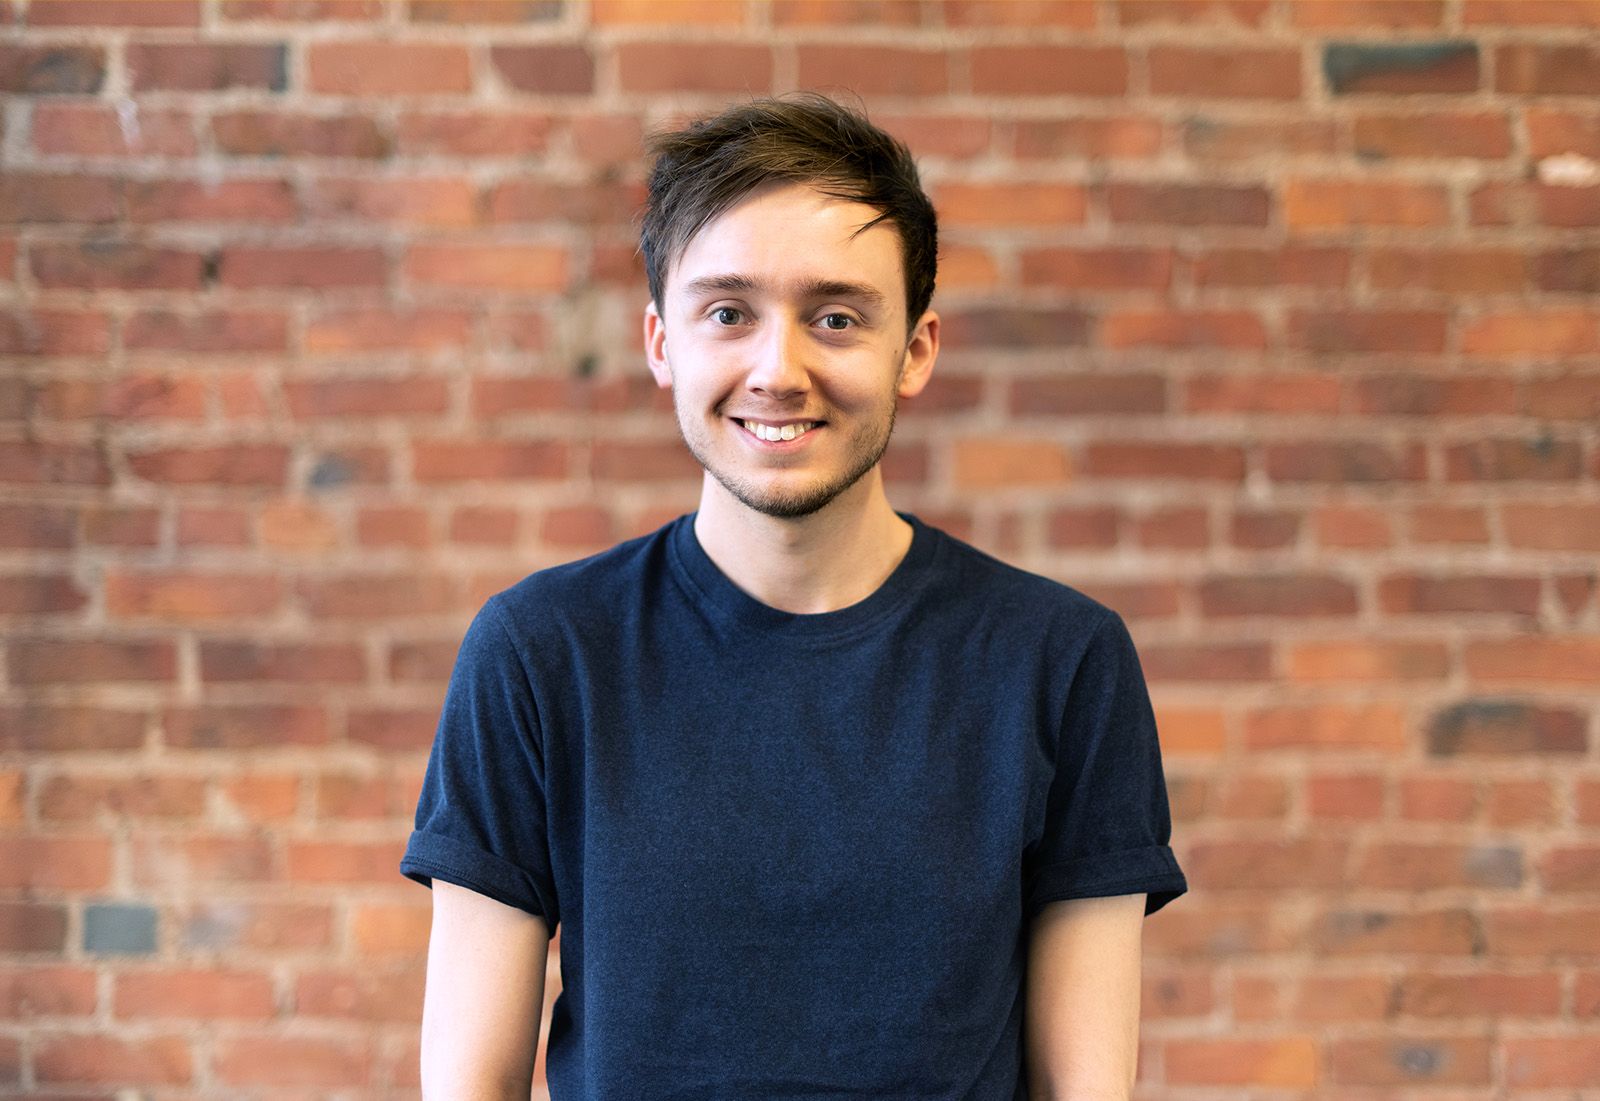 This guy will go far-ey — Welcoming James Farey to the RotaCloud team